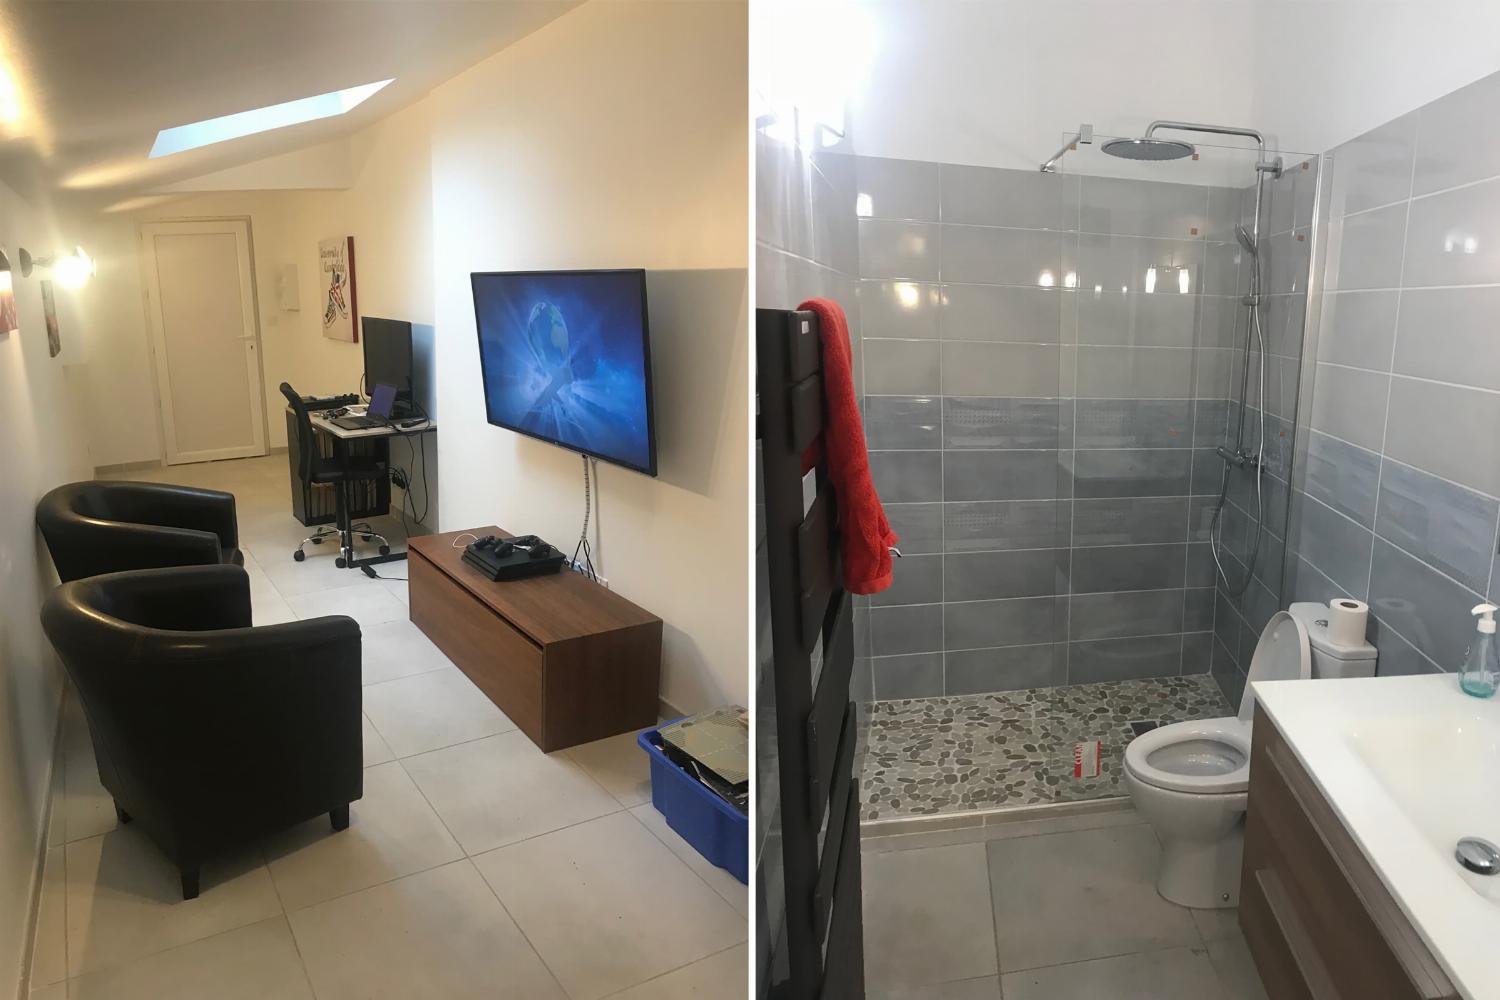 Bathroom and cinema | Rental home in South of France